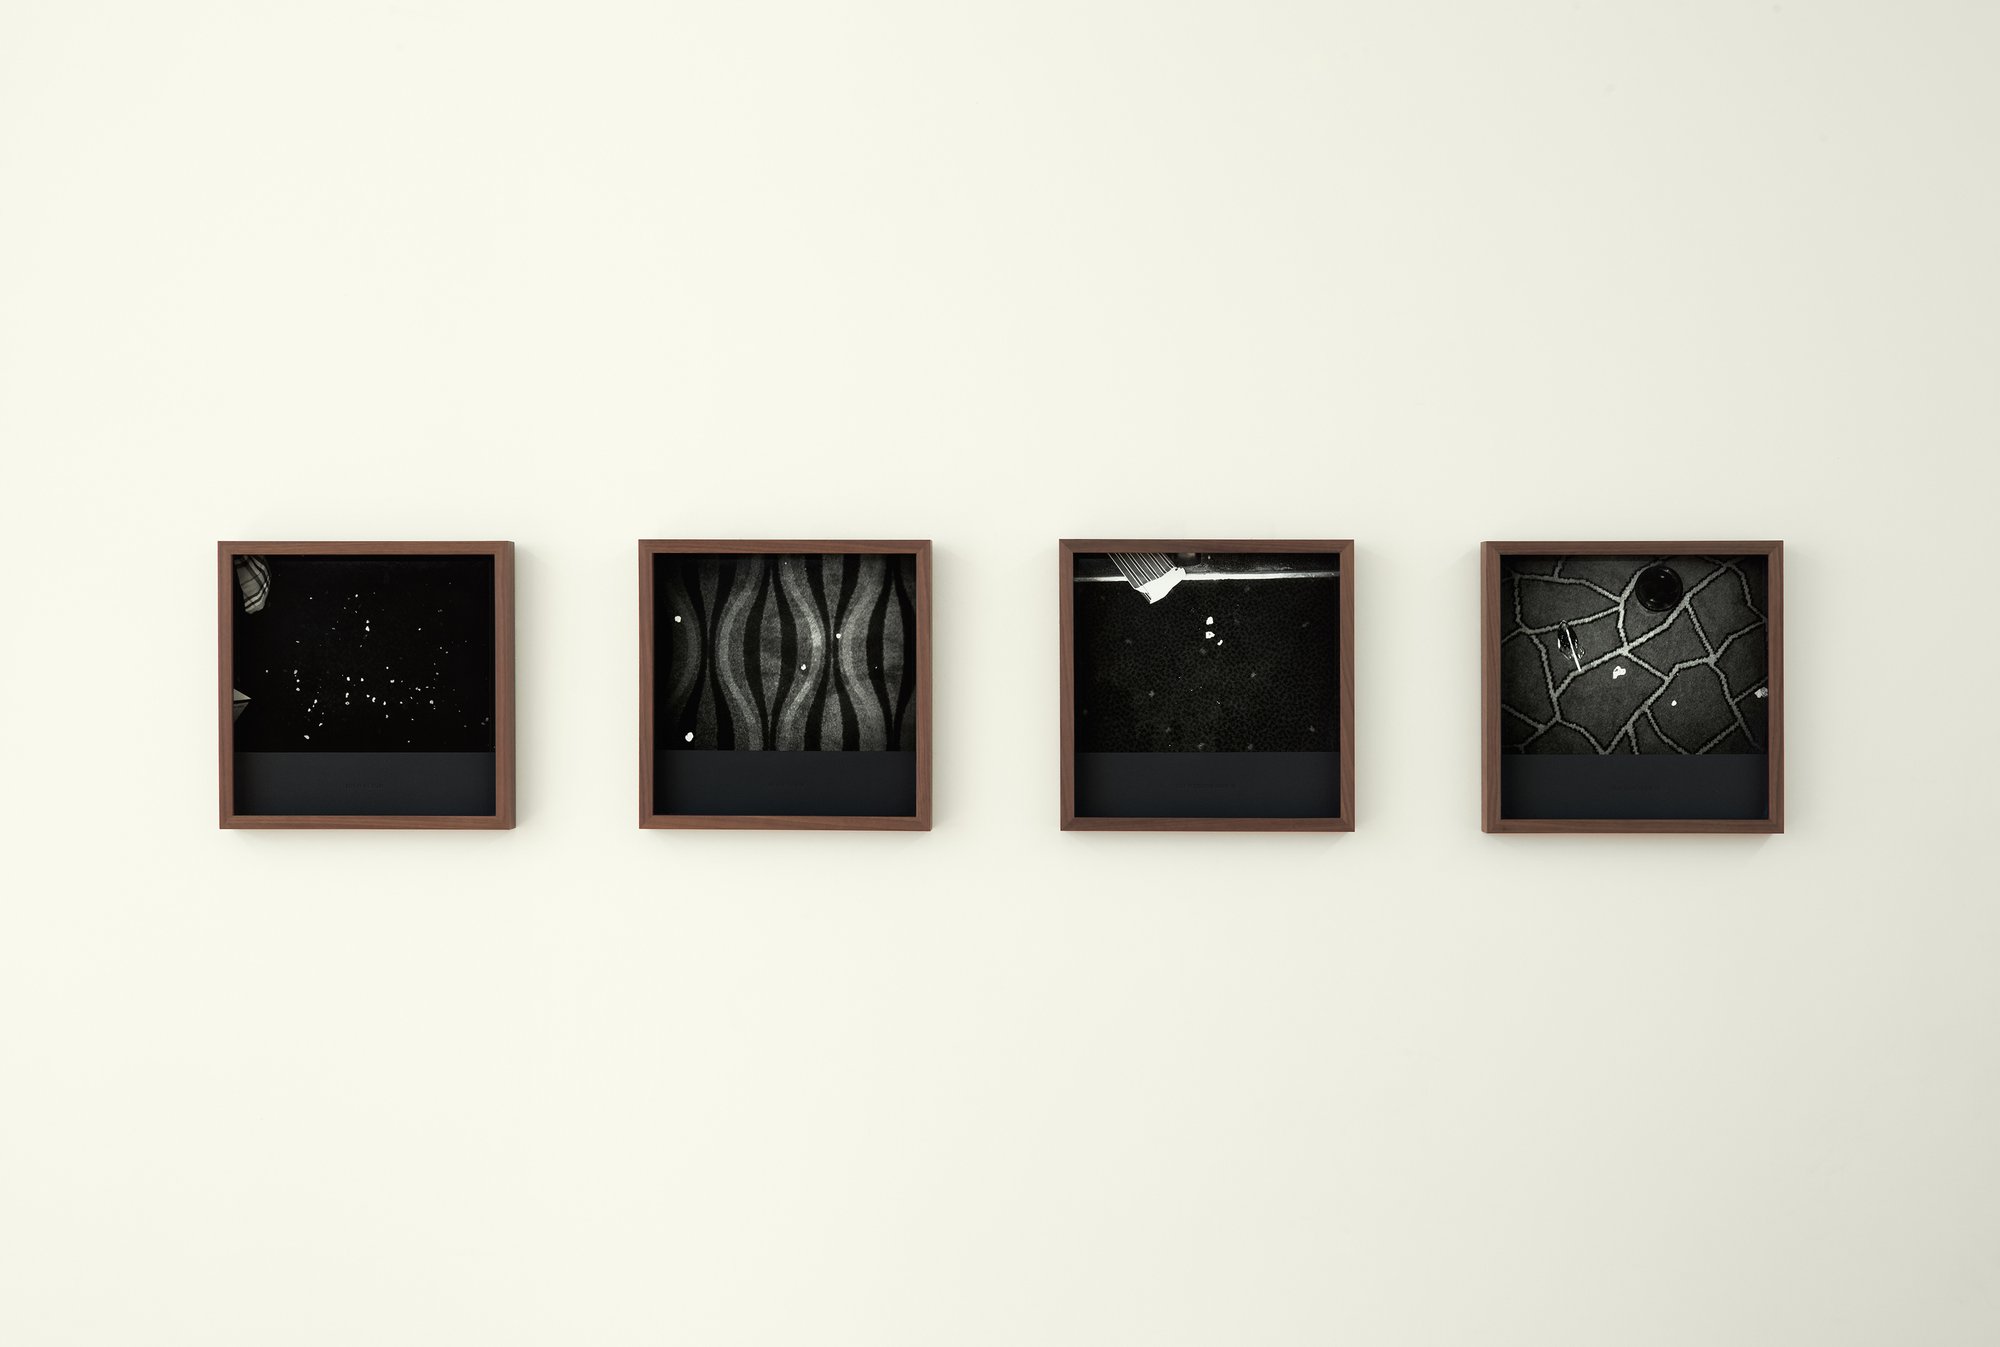 Mark Aerial Waller, Popcorn Casts, framed monochrome photographic prints, 27.1 x 20.5 cm each, 2011/12. Installation view, The Chicken and The Egg, The Chicken, Rodeo, London, 2015